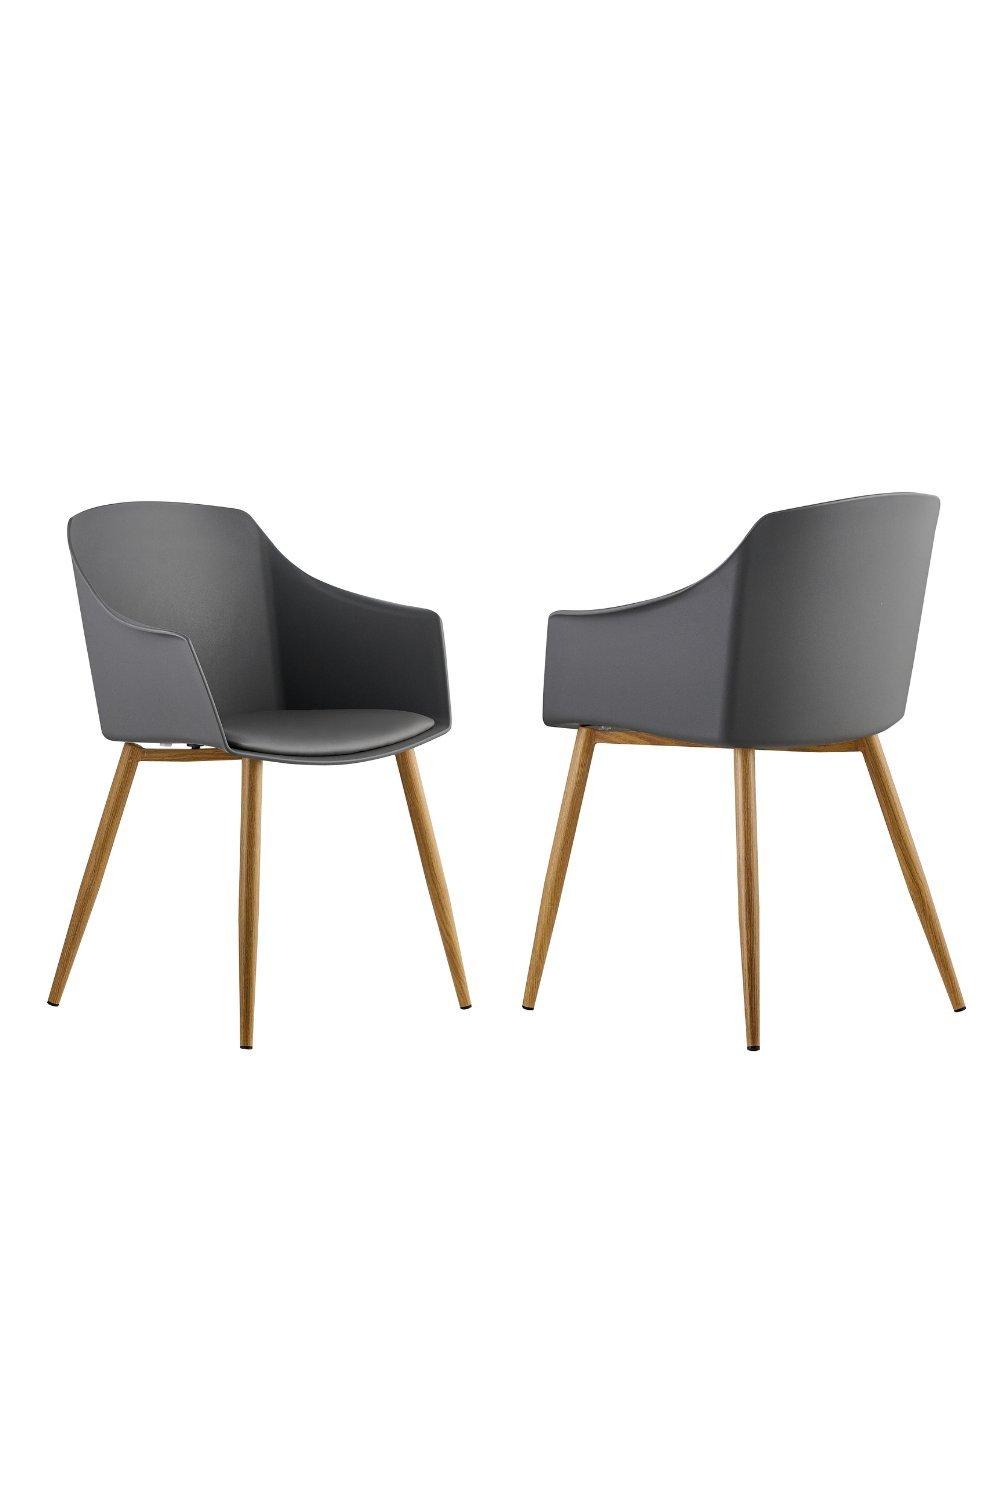 Eden' Dining Chairs Set of 2